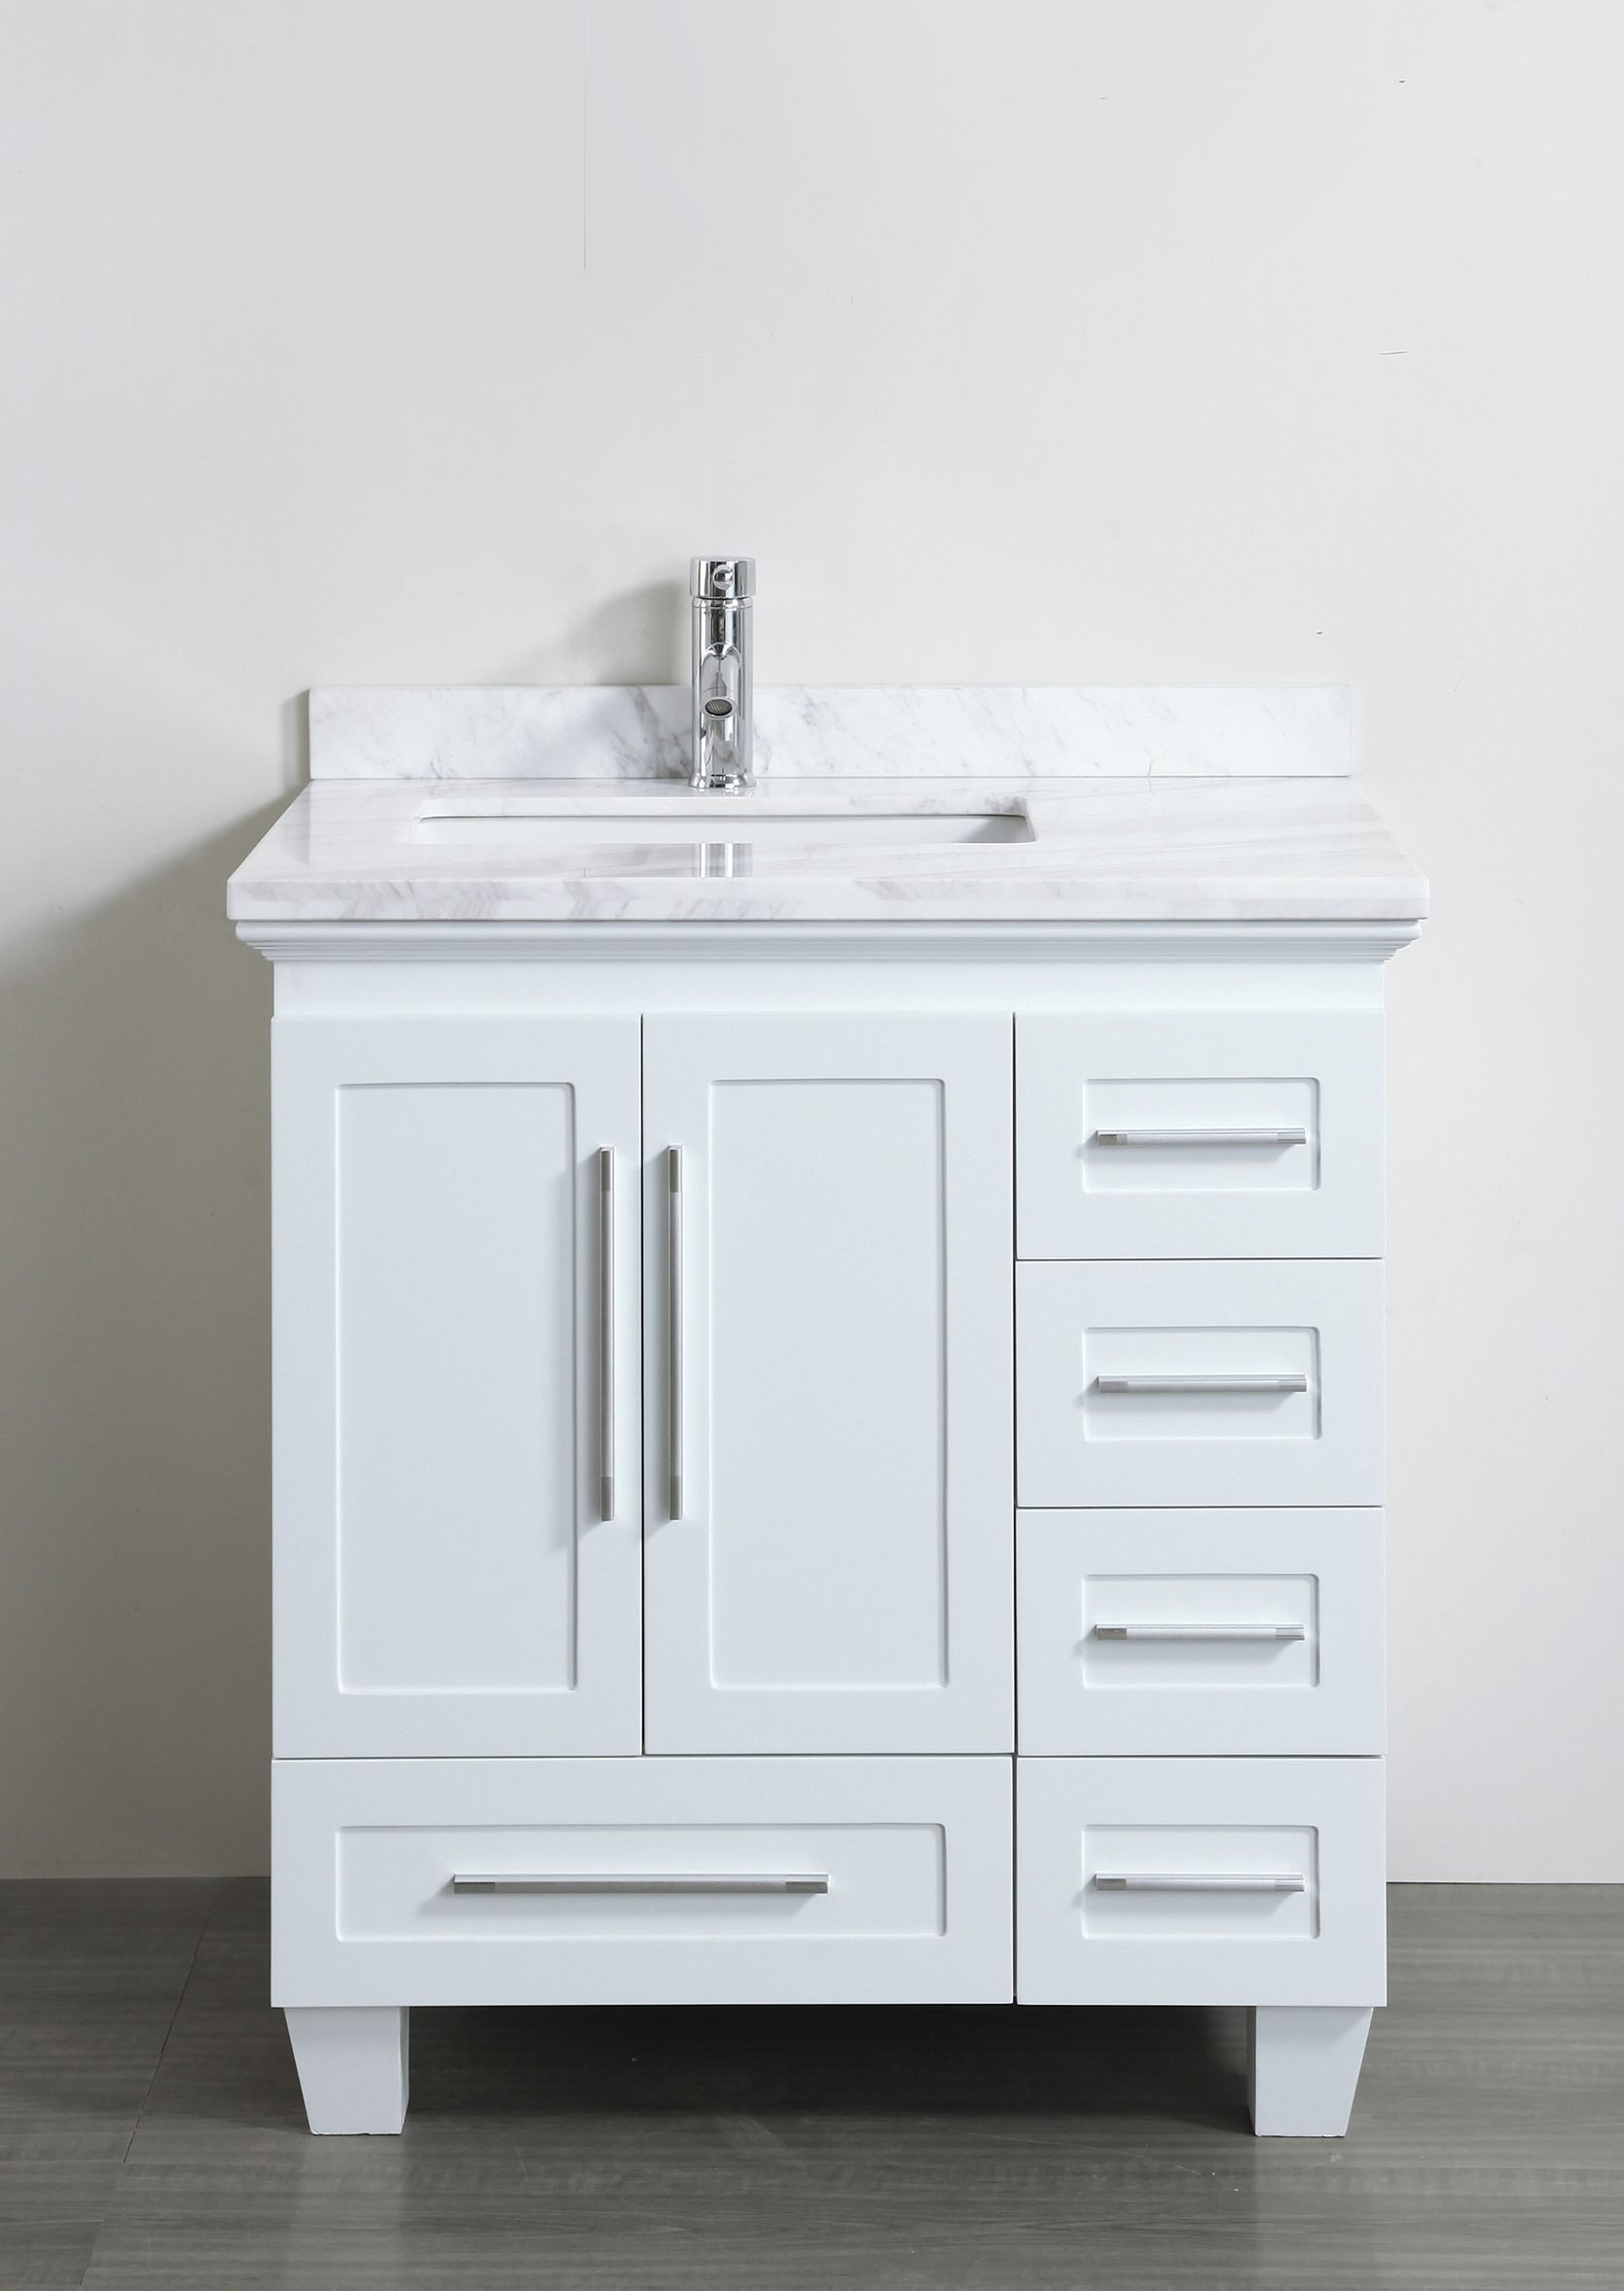 30 Bathroom Vanity With Drawers
 Accanto Contemporary 30 inch White Finish Bathroom Vanity